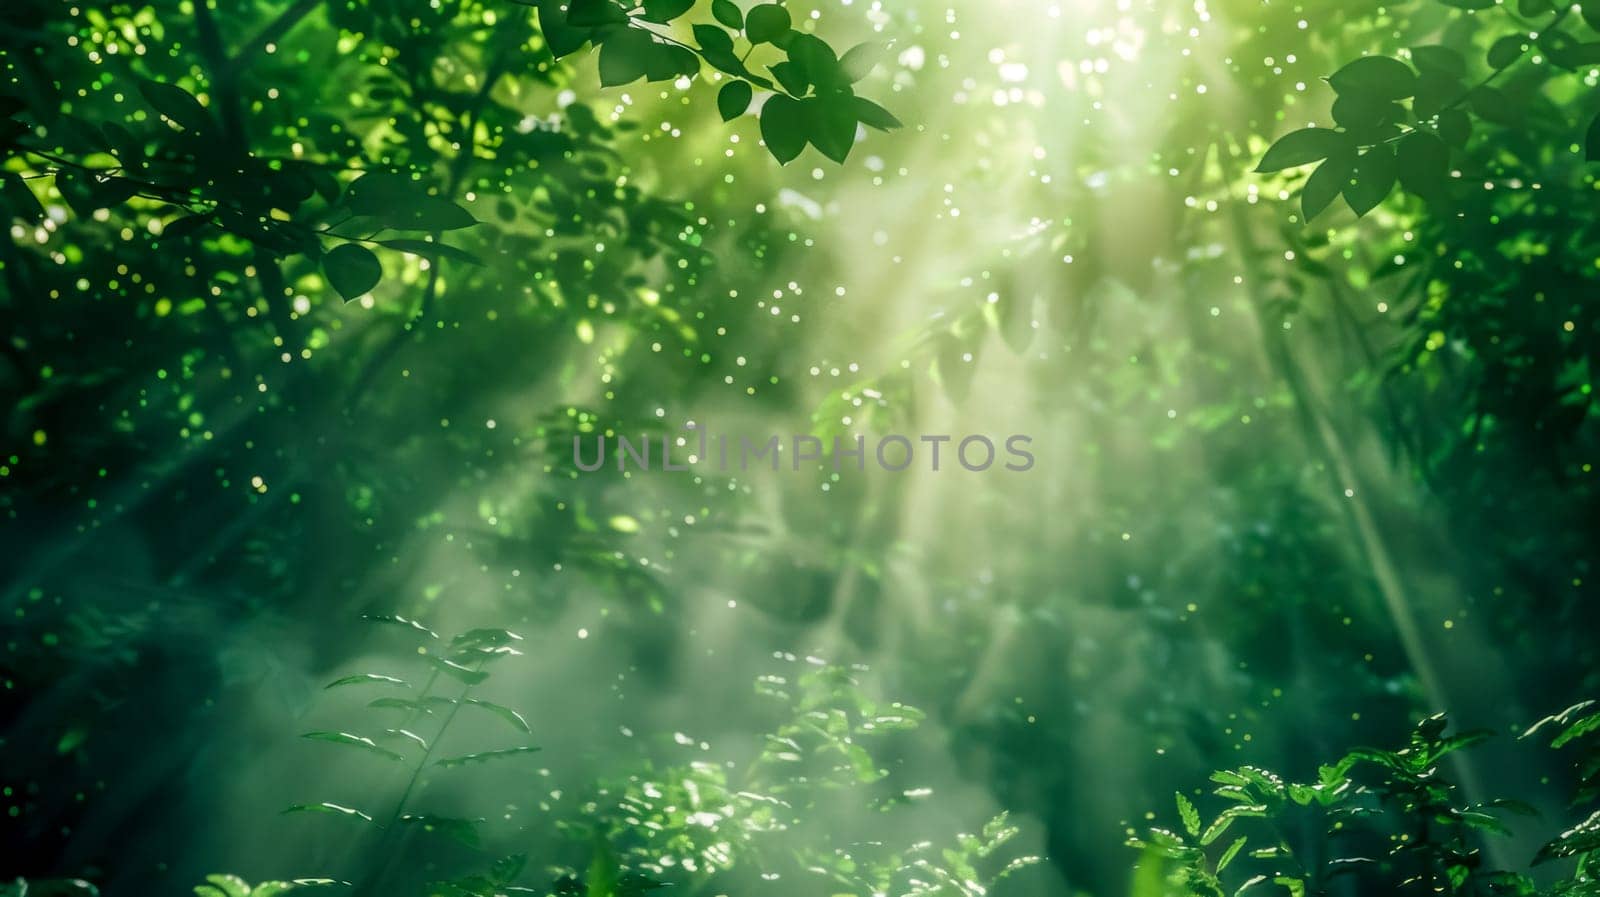 Sunlight pierces through a verdant forest, creating mystic rays amid the foliage by Edophoto